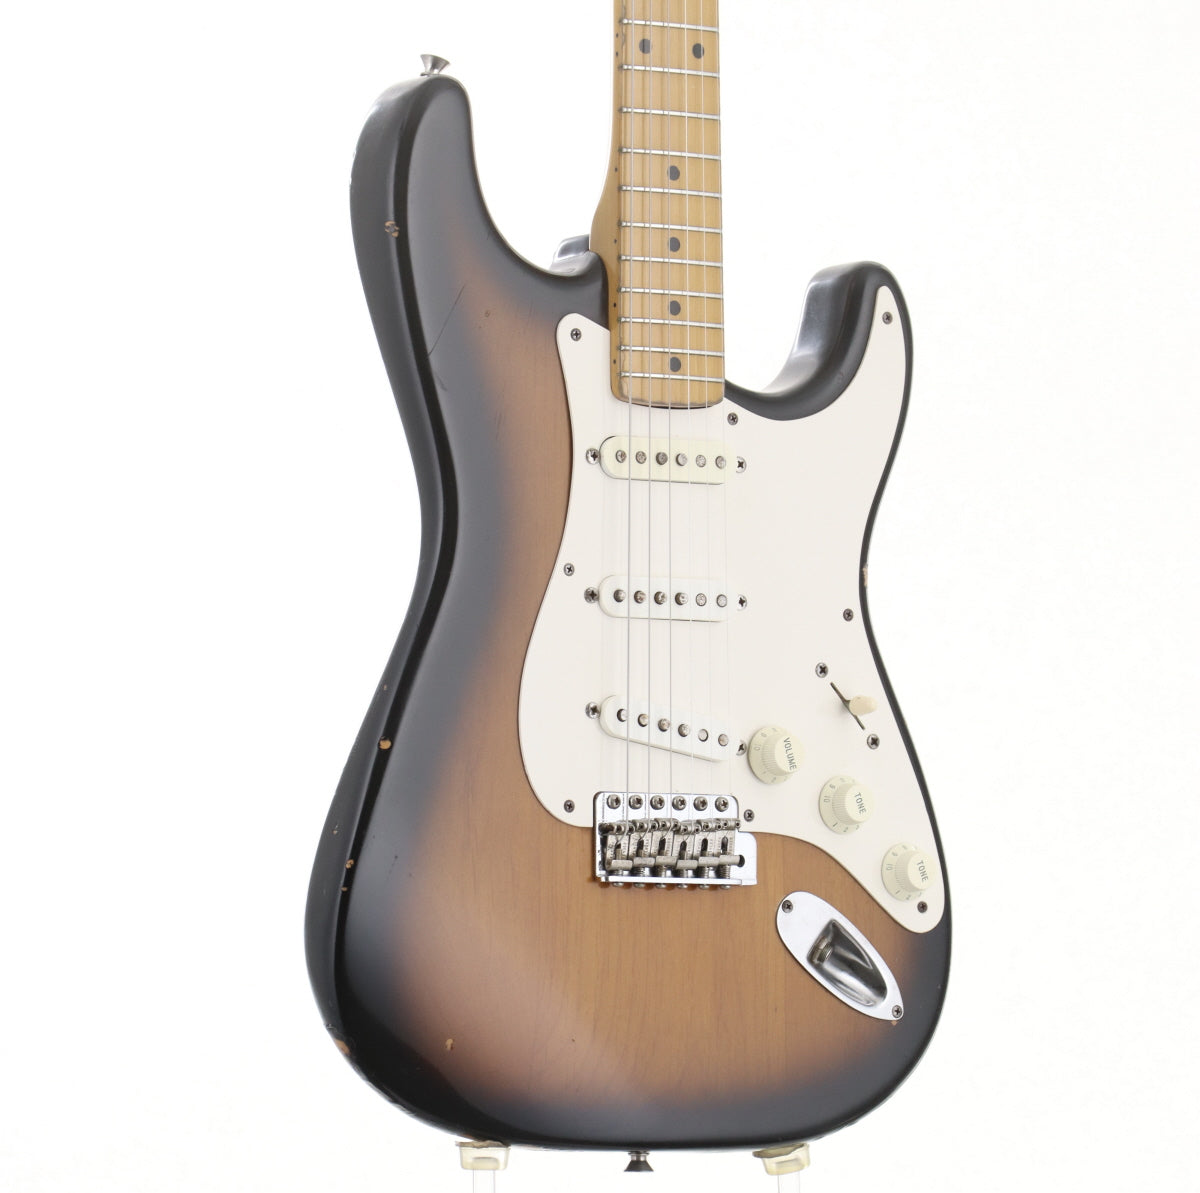 [SN Q017690] USED Fender / ST57 Modified [03]